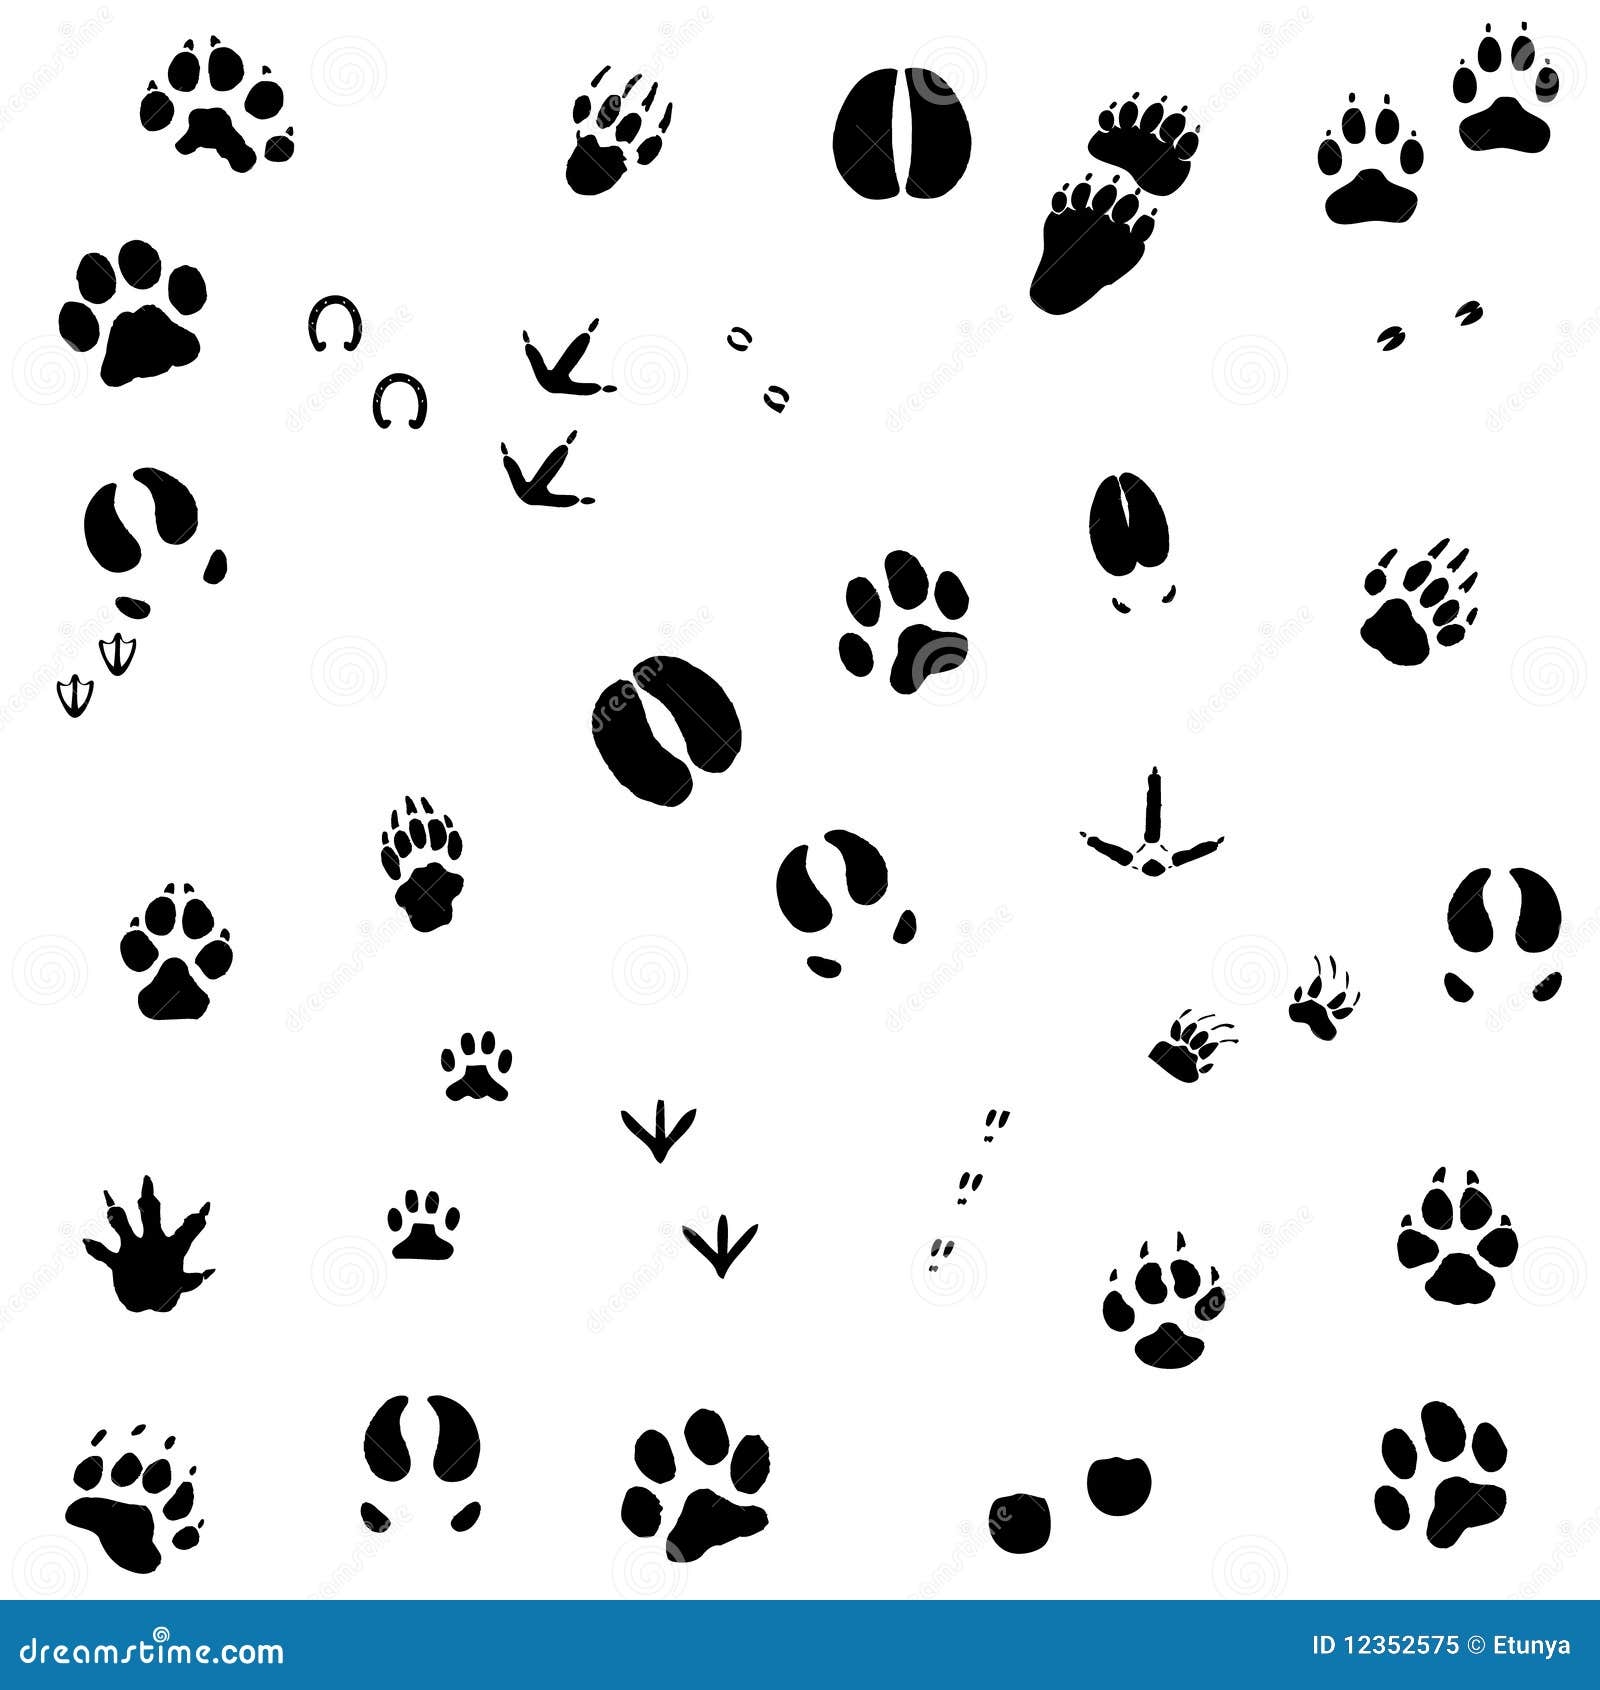 mouse footprint clipart - photo #50